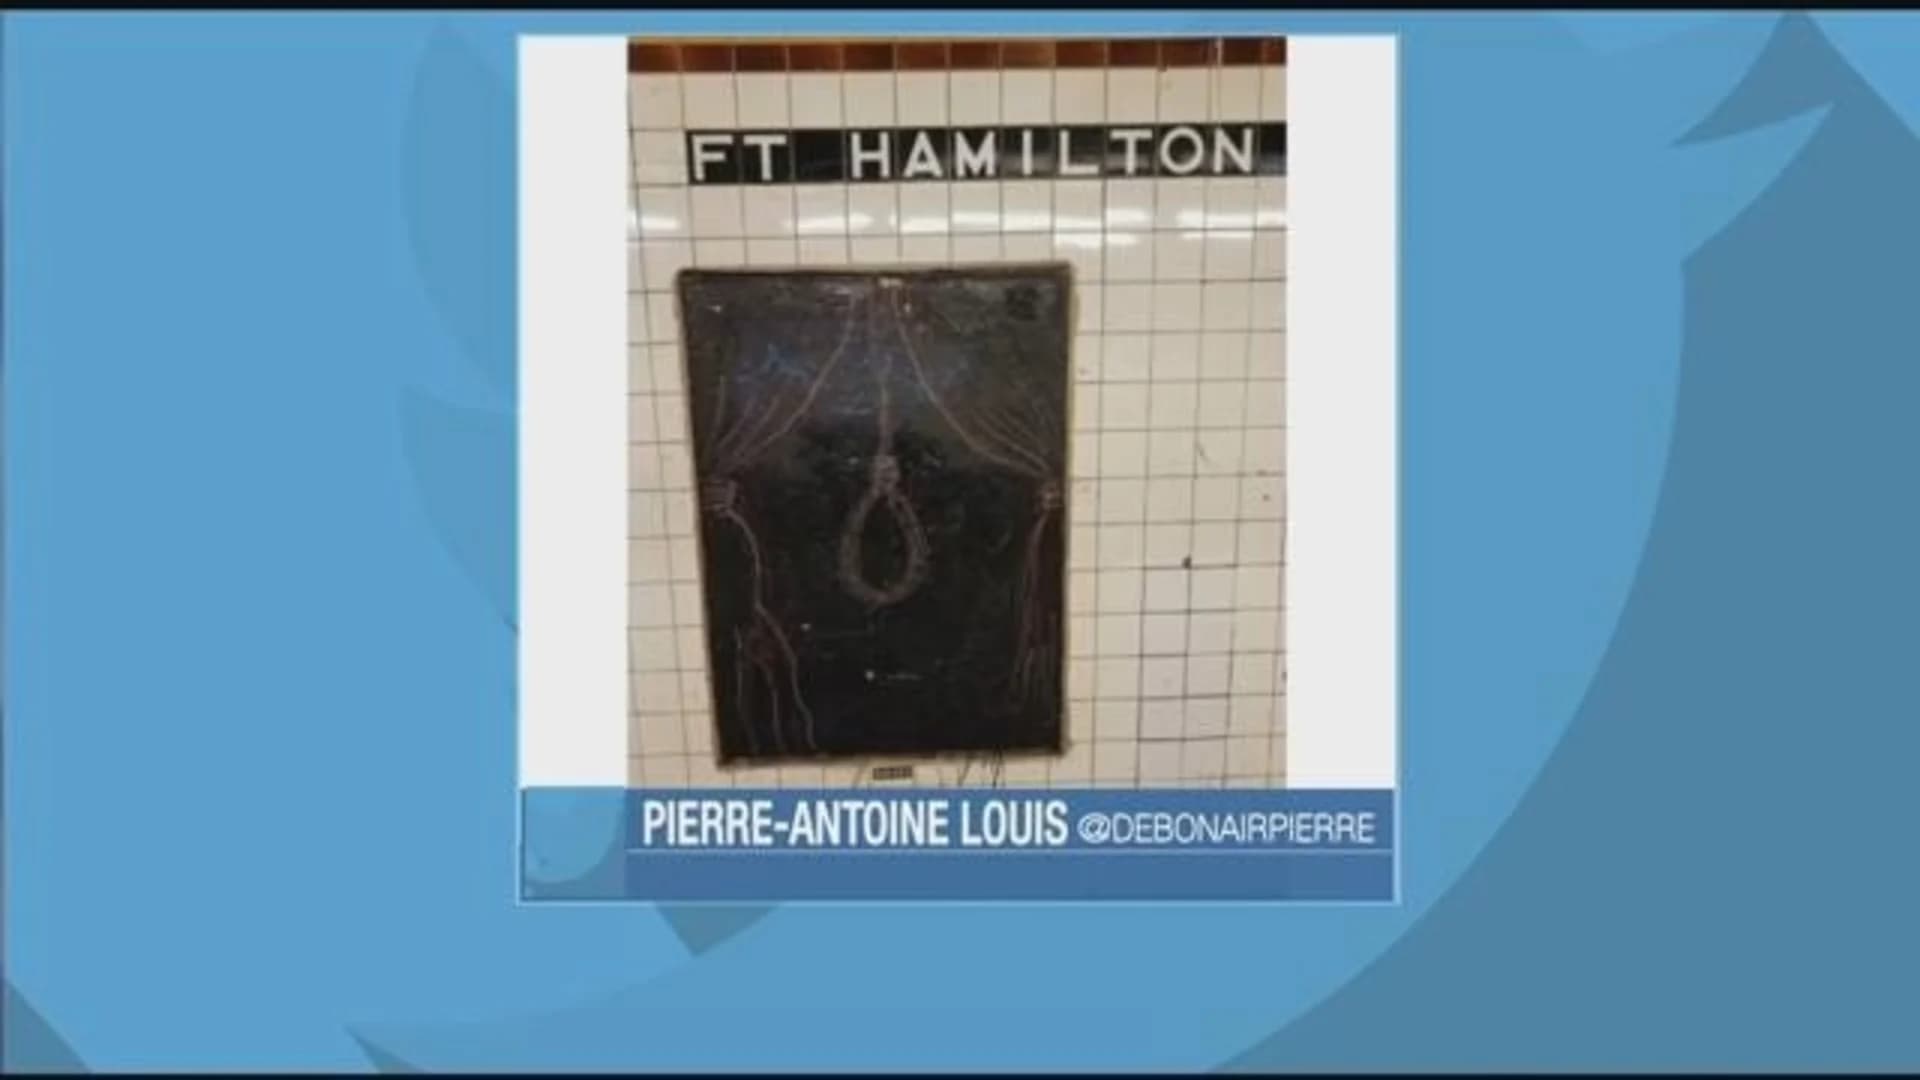 Chalk image of lynching rope found in Kensington subway station